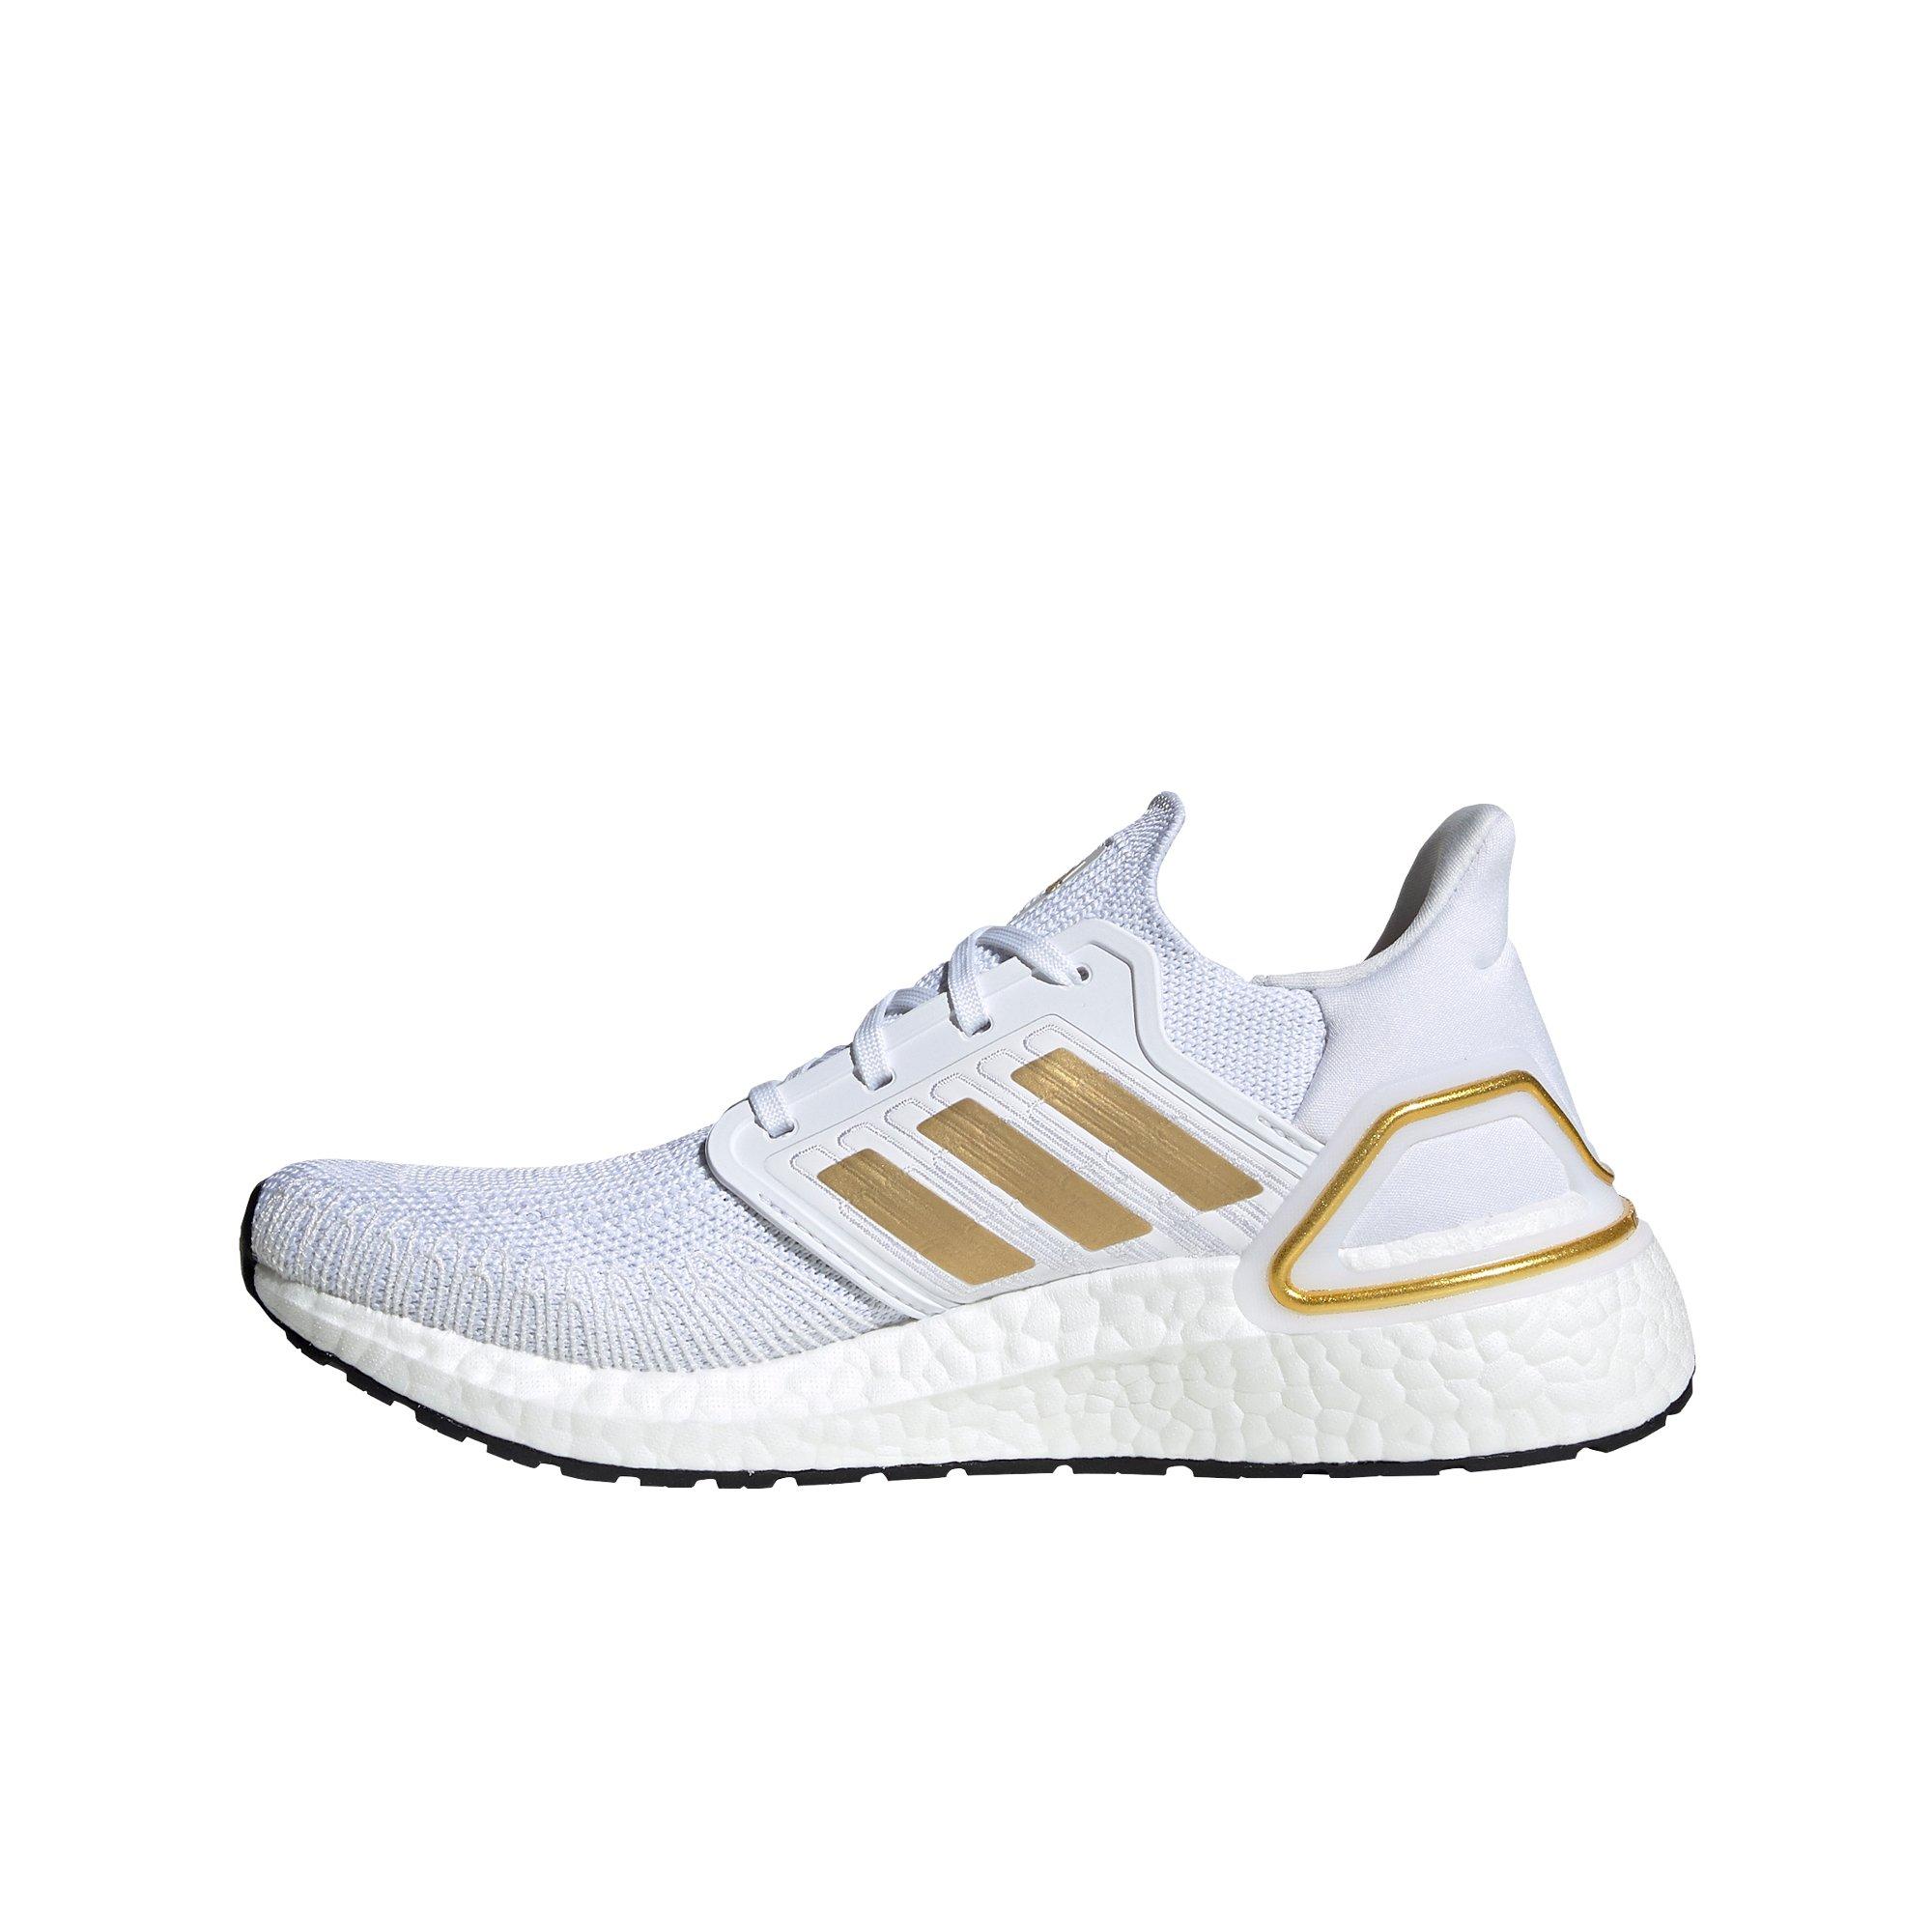 adidas ultra boost white gold